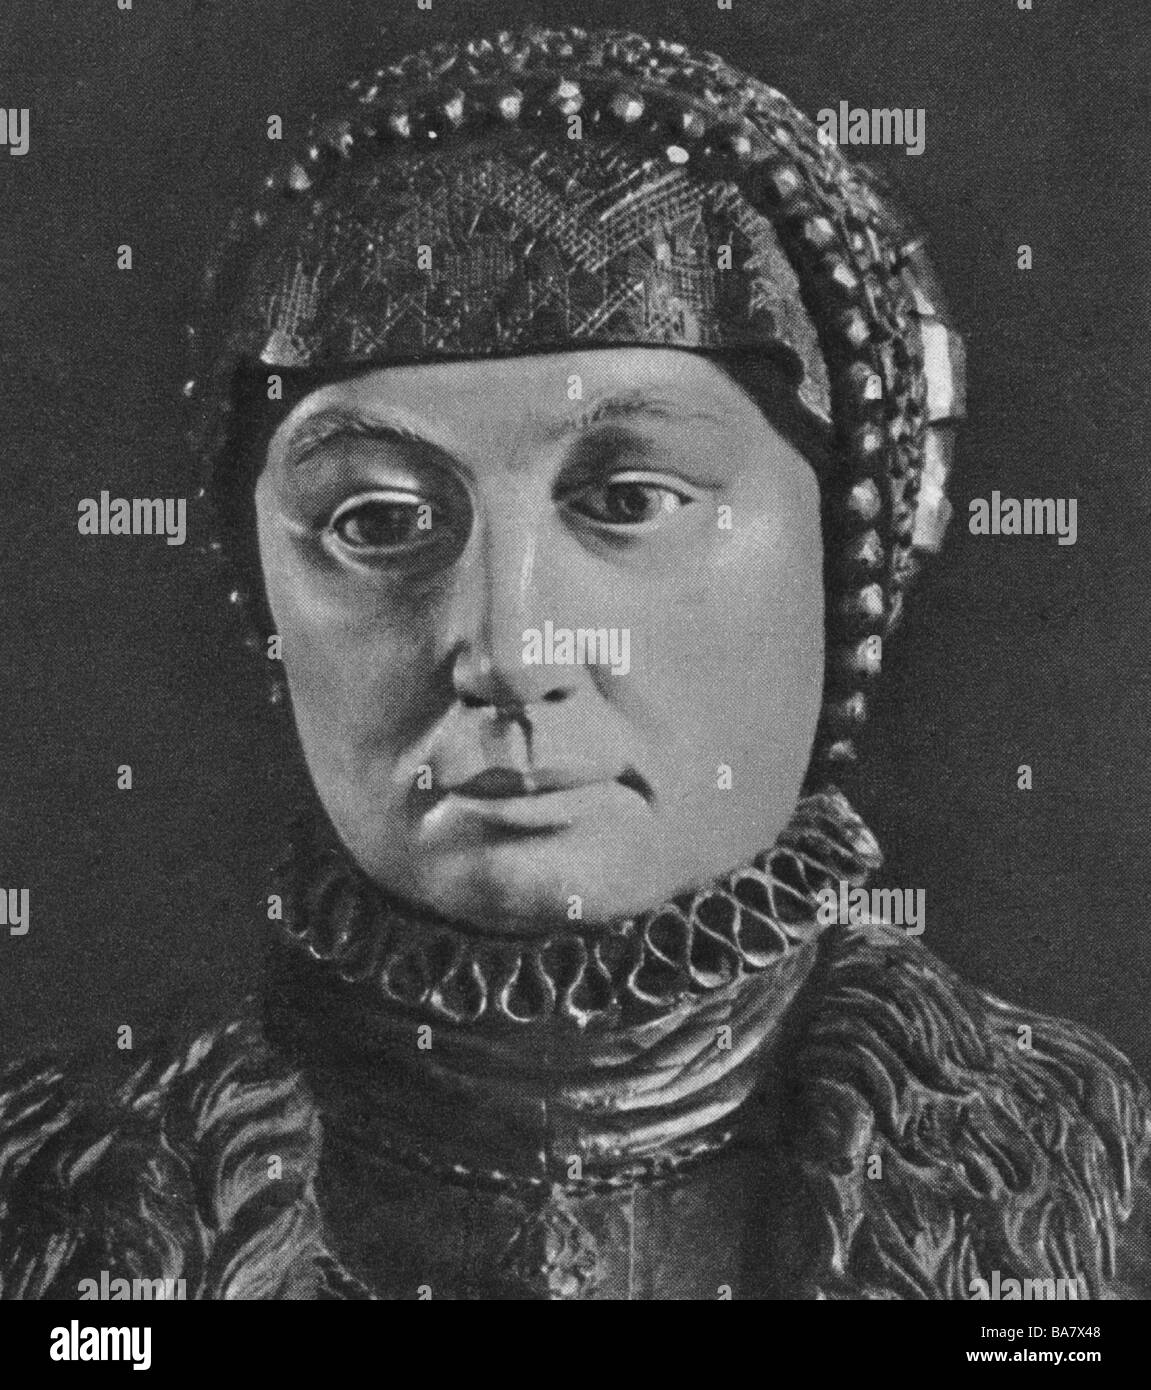 Uttmann, Barbara, 1514 - 15.10.1575, German inventor of bobbin lace making, portrait, face of a carved figure from the 16th century, Stock Photo